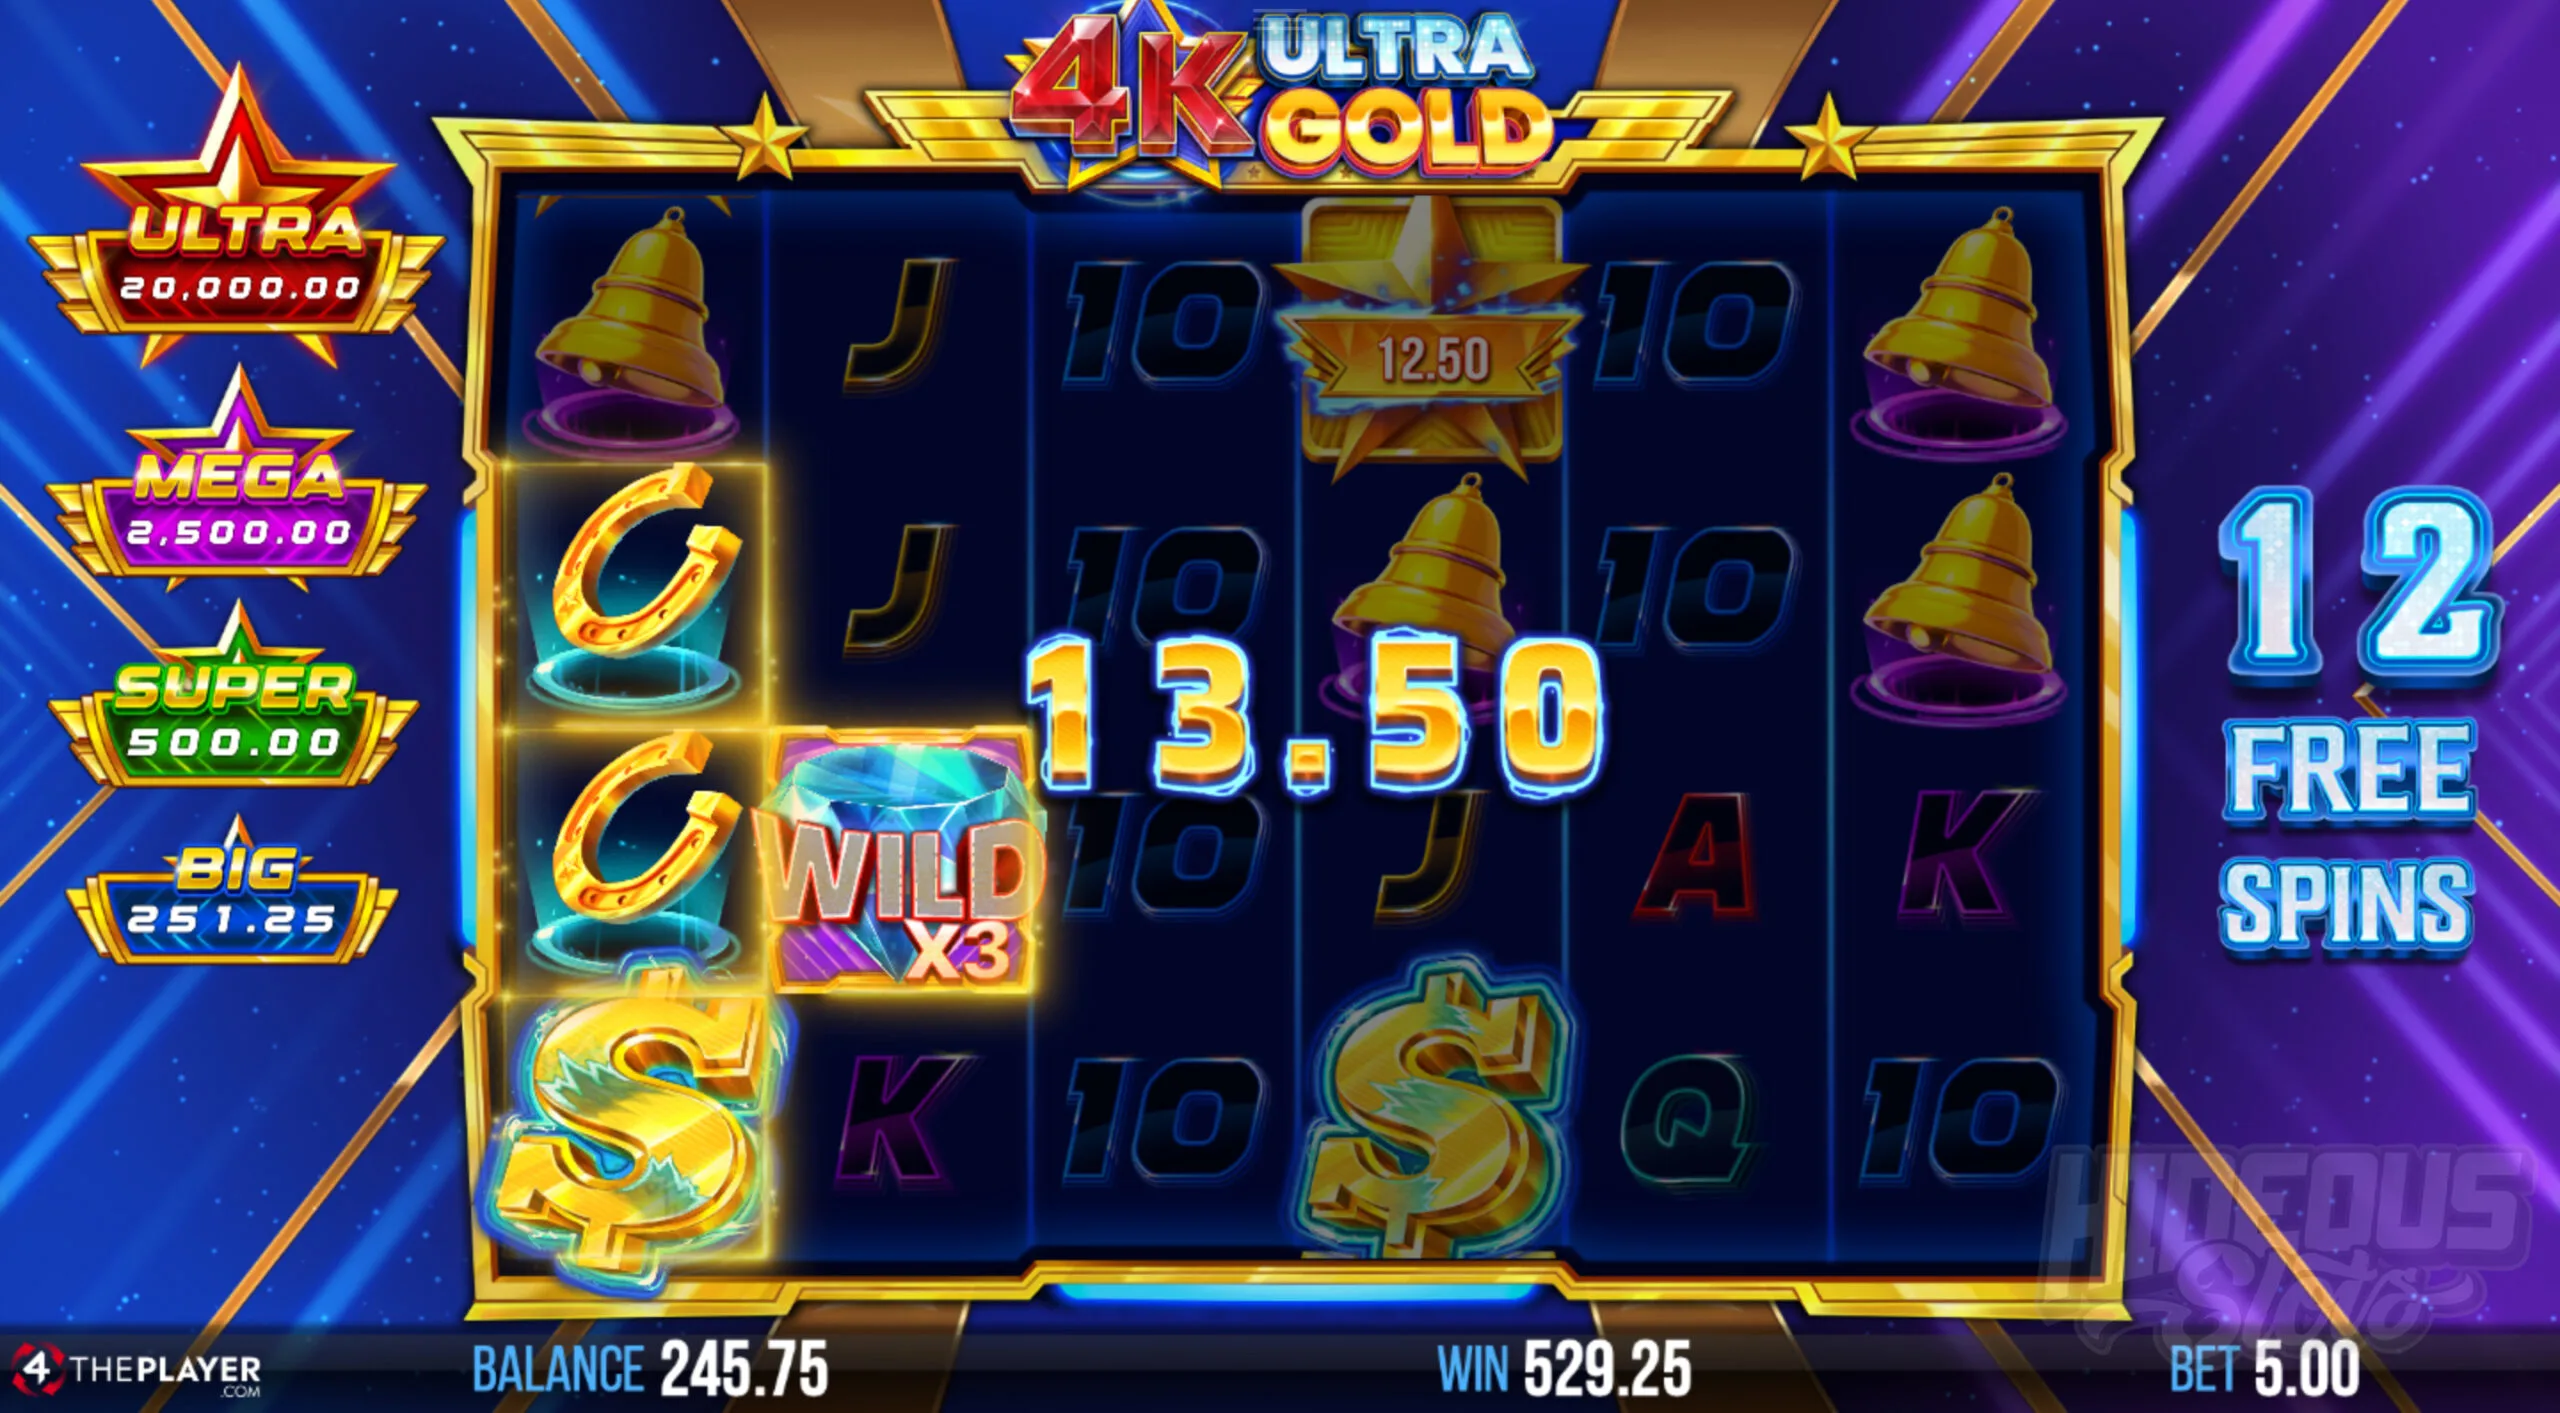 All Wilds Gain Multipliers During Free Spins